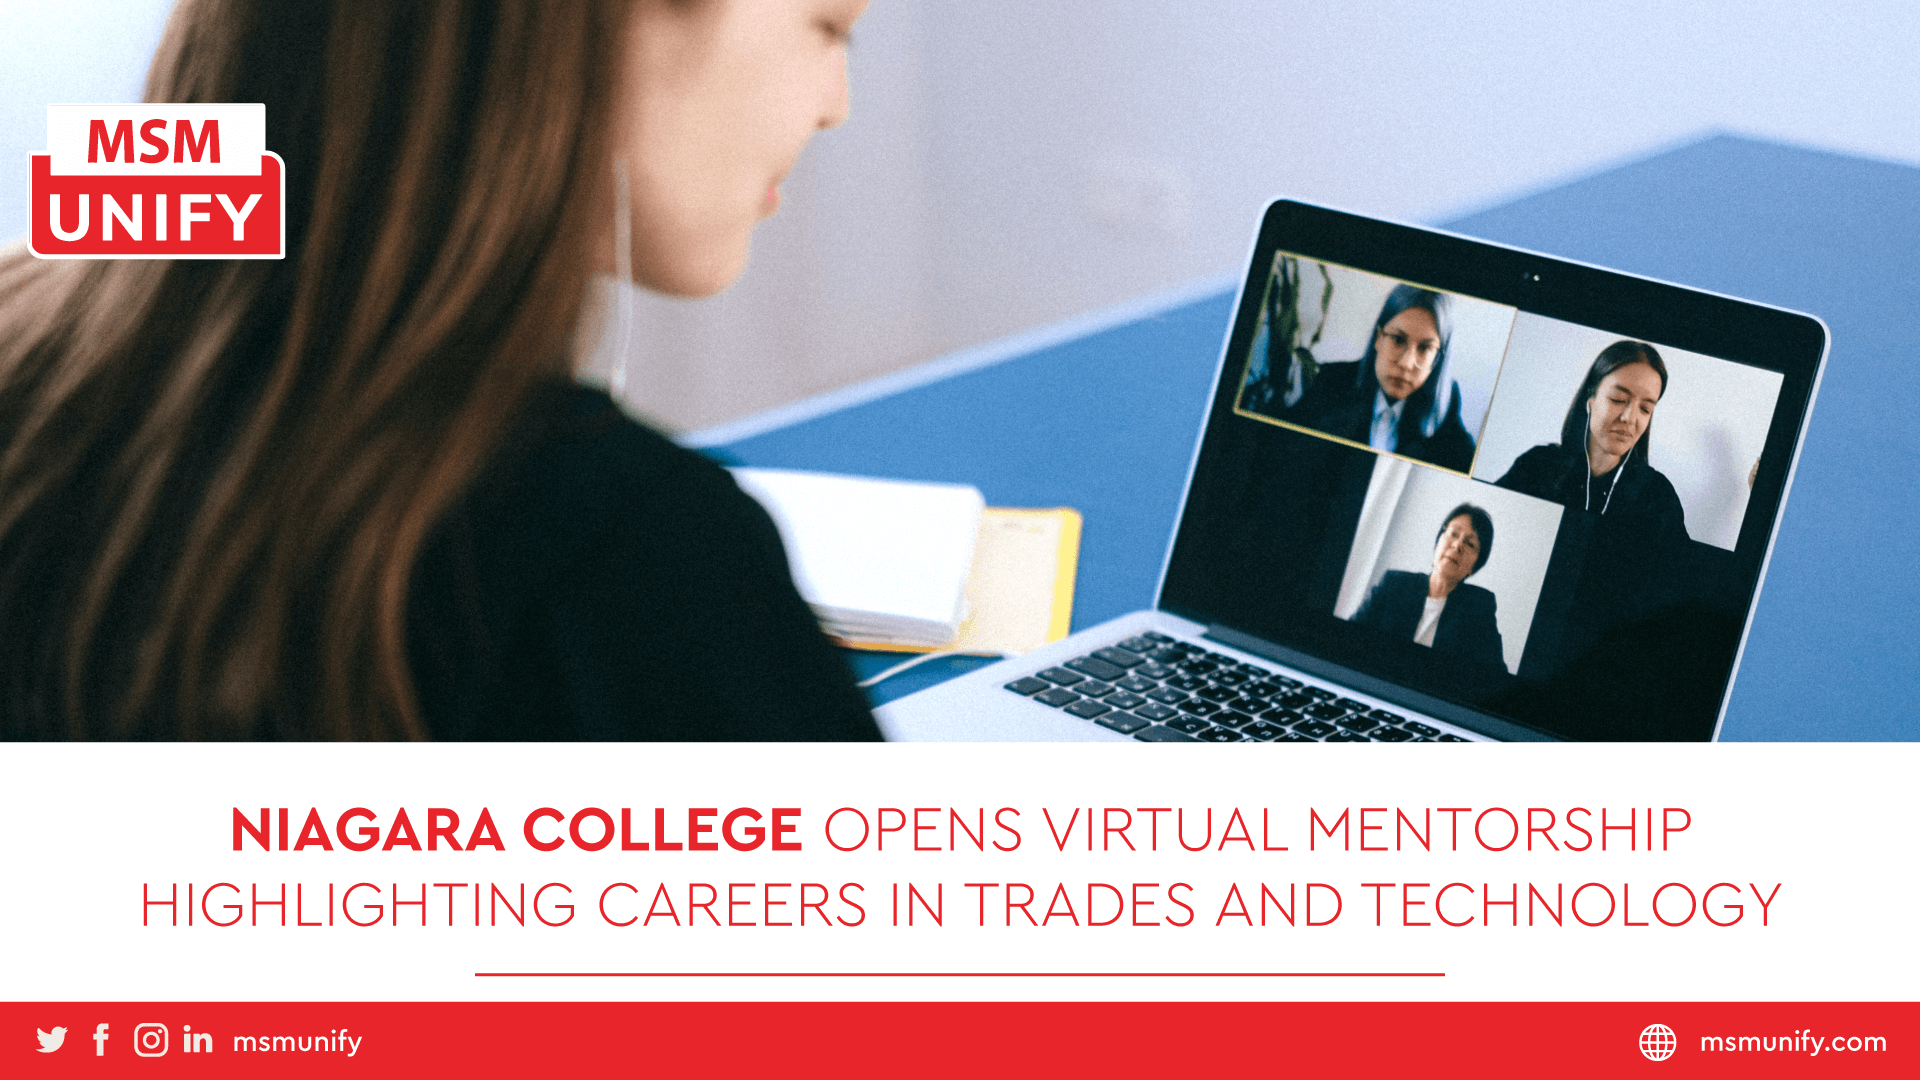 Niagara College Opens Virtual Mentorship Highlighting Careers in Trades And Technology